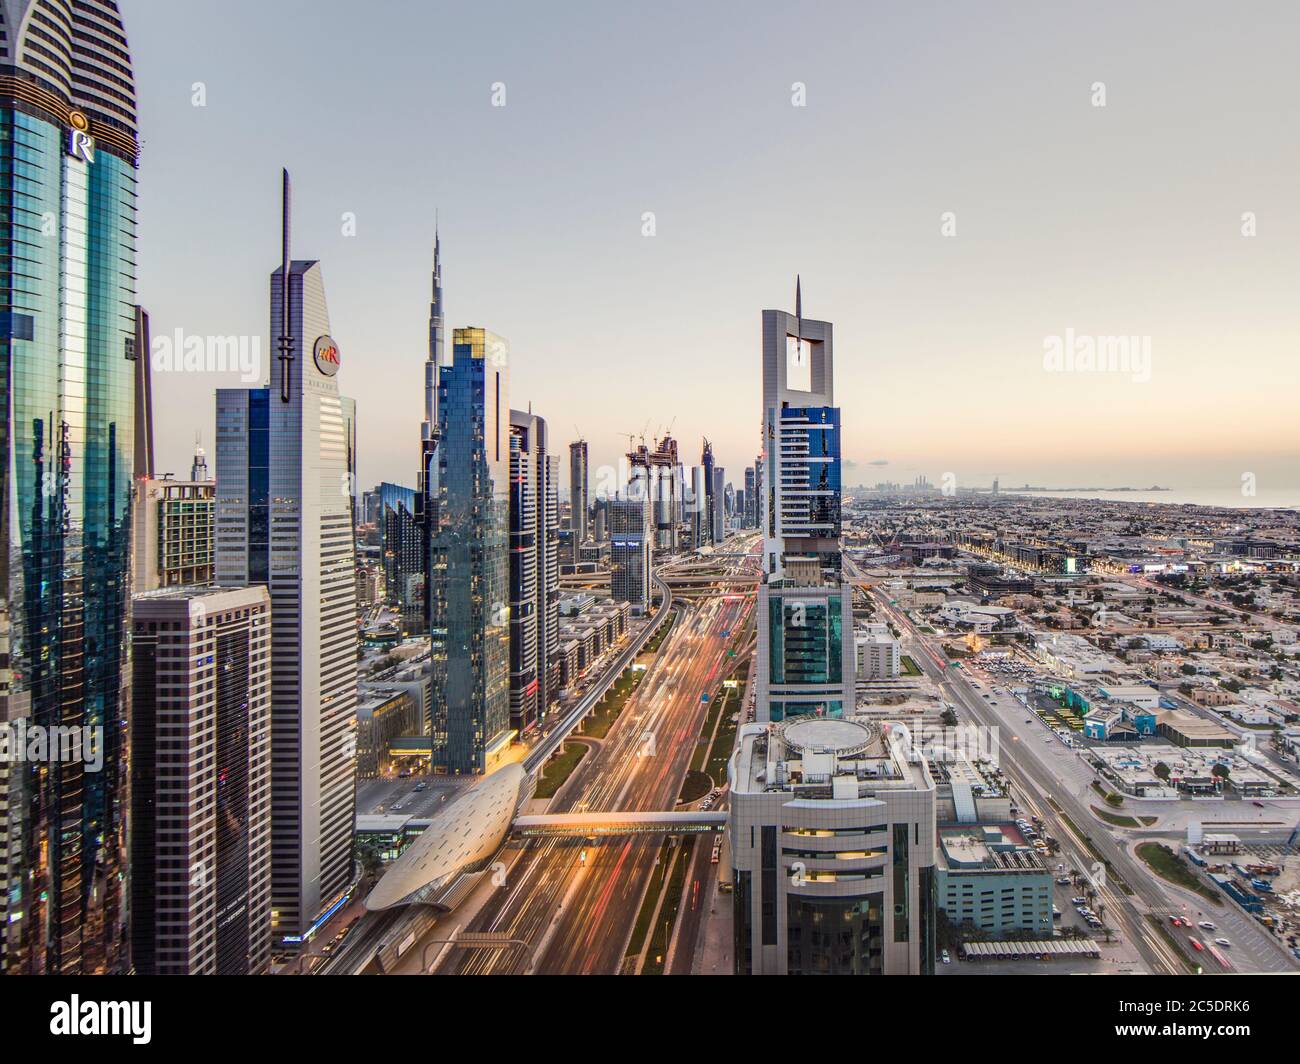 Areal view on Sheik Zayed road in Dubai Stock Photo